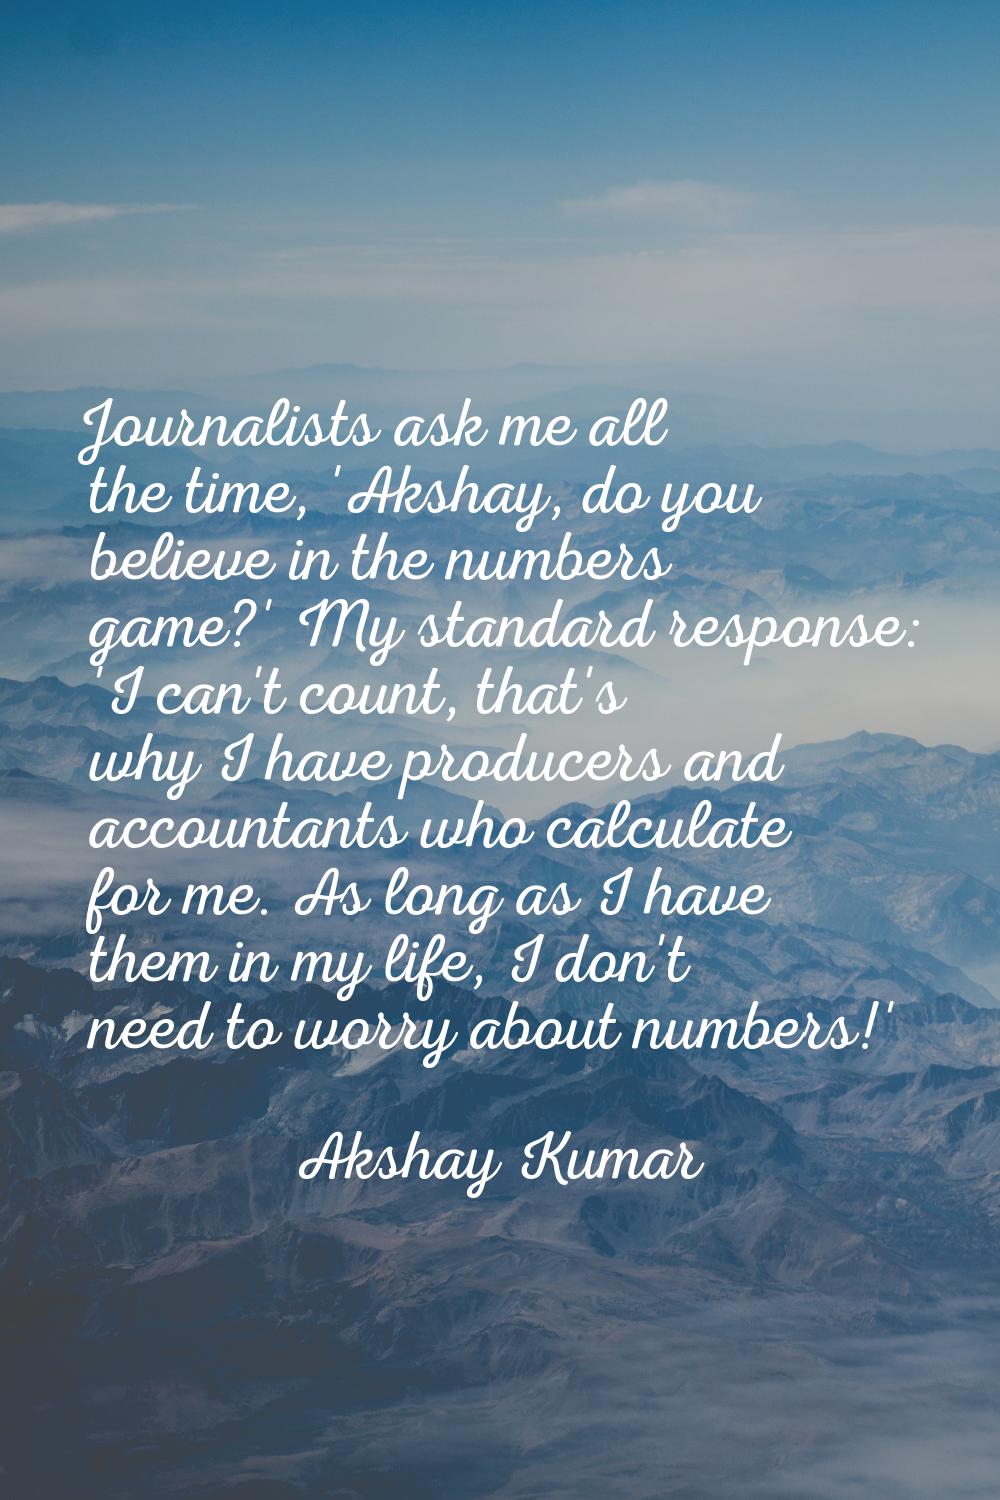 Journalists ask me all the time, 'Akshay, do you believe in the numbers game?' My standard response